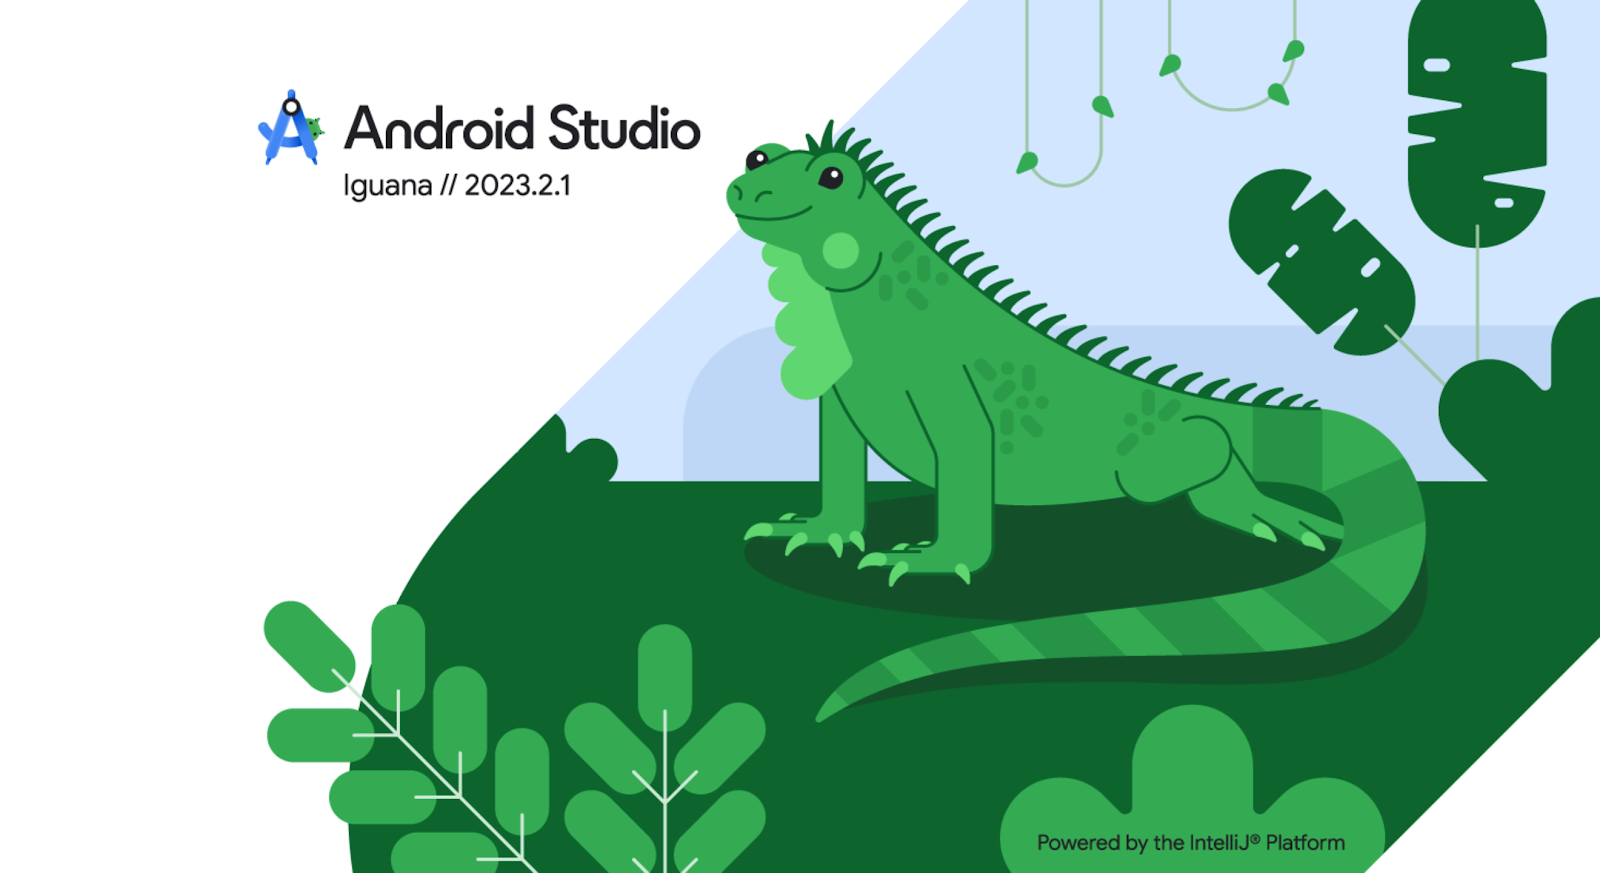 Android Studio Iguana: A Leap Forward in Android Development